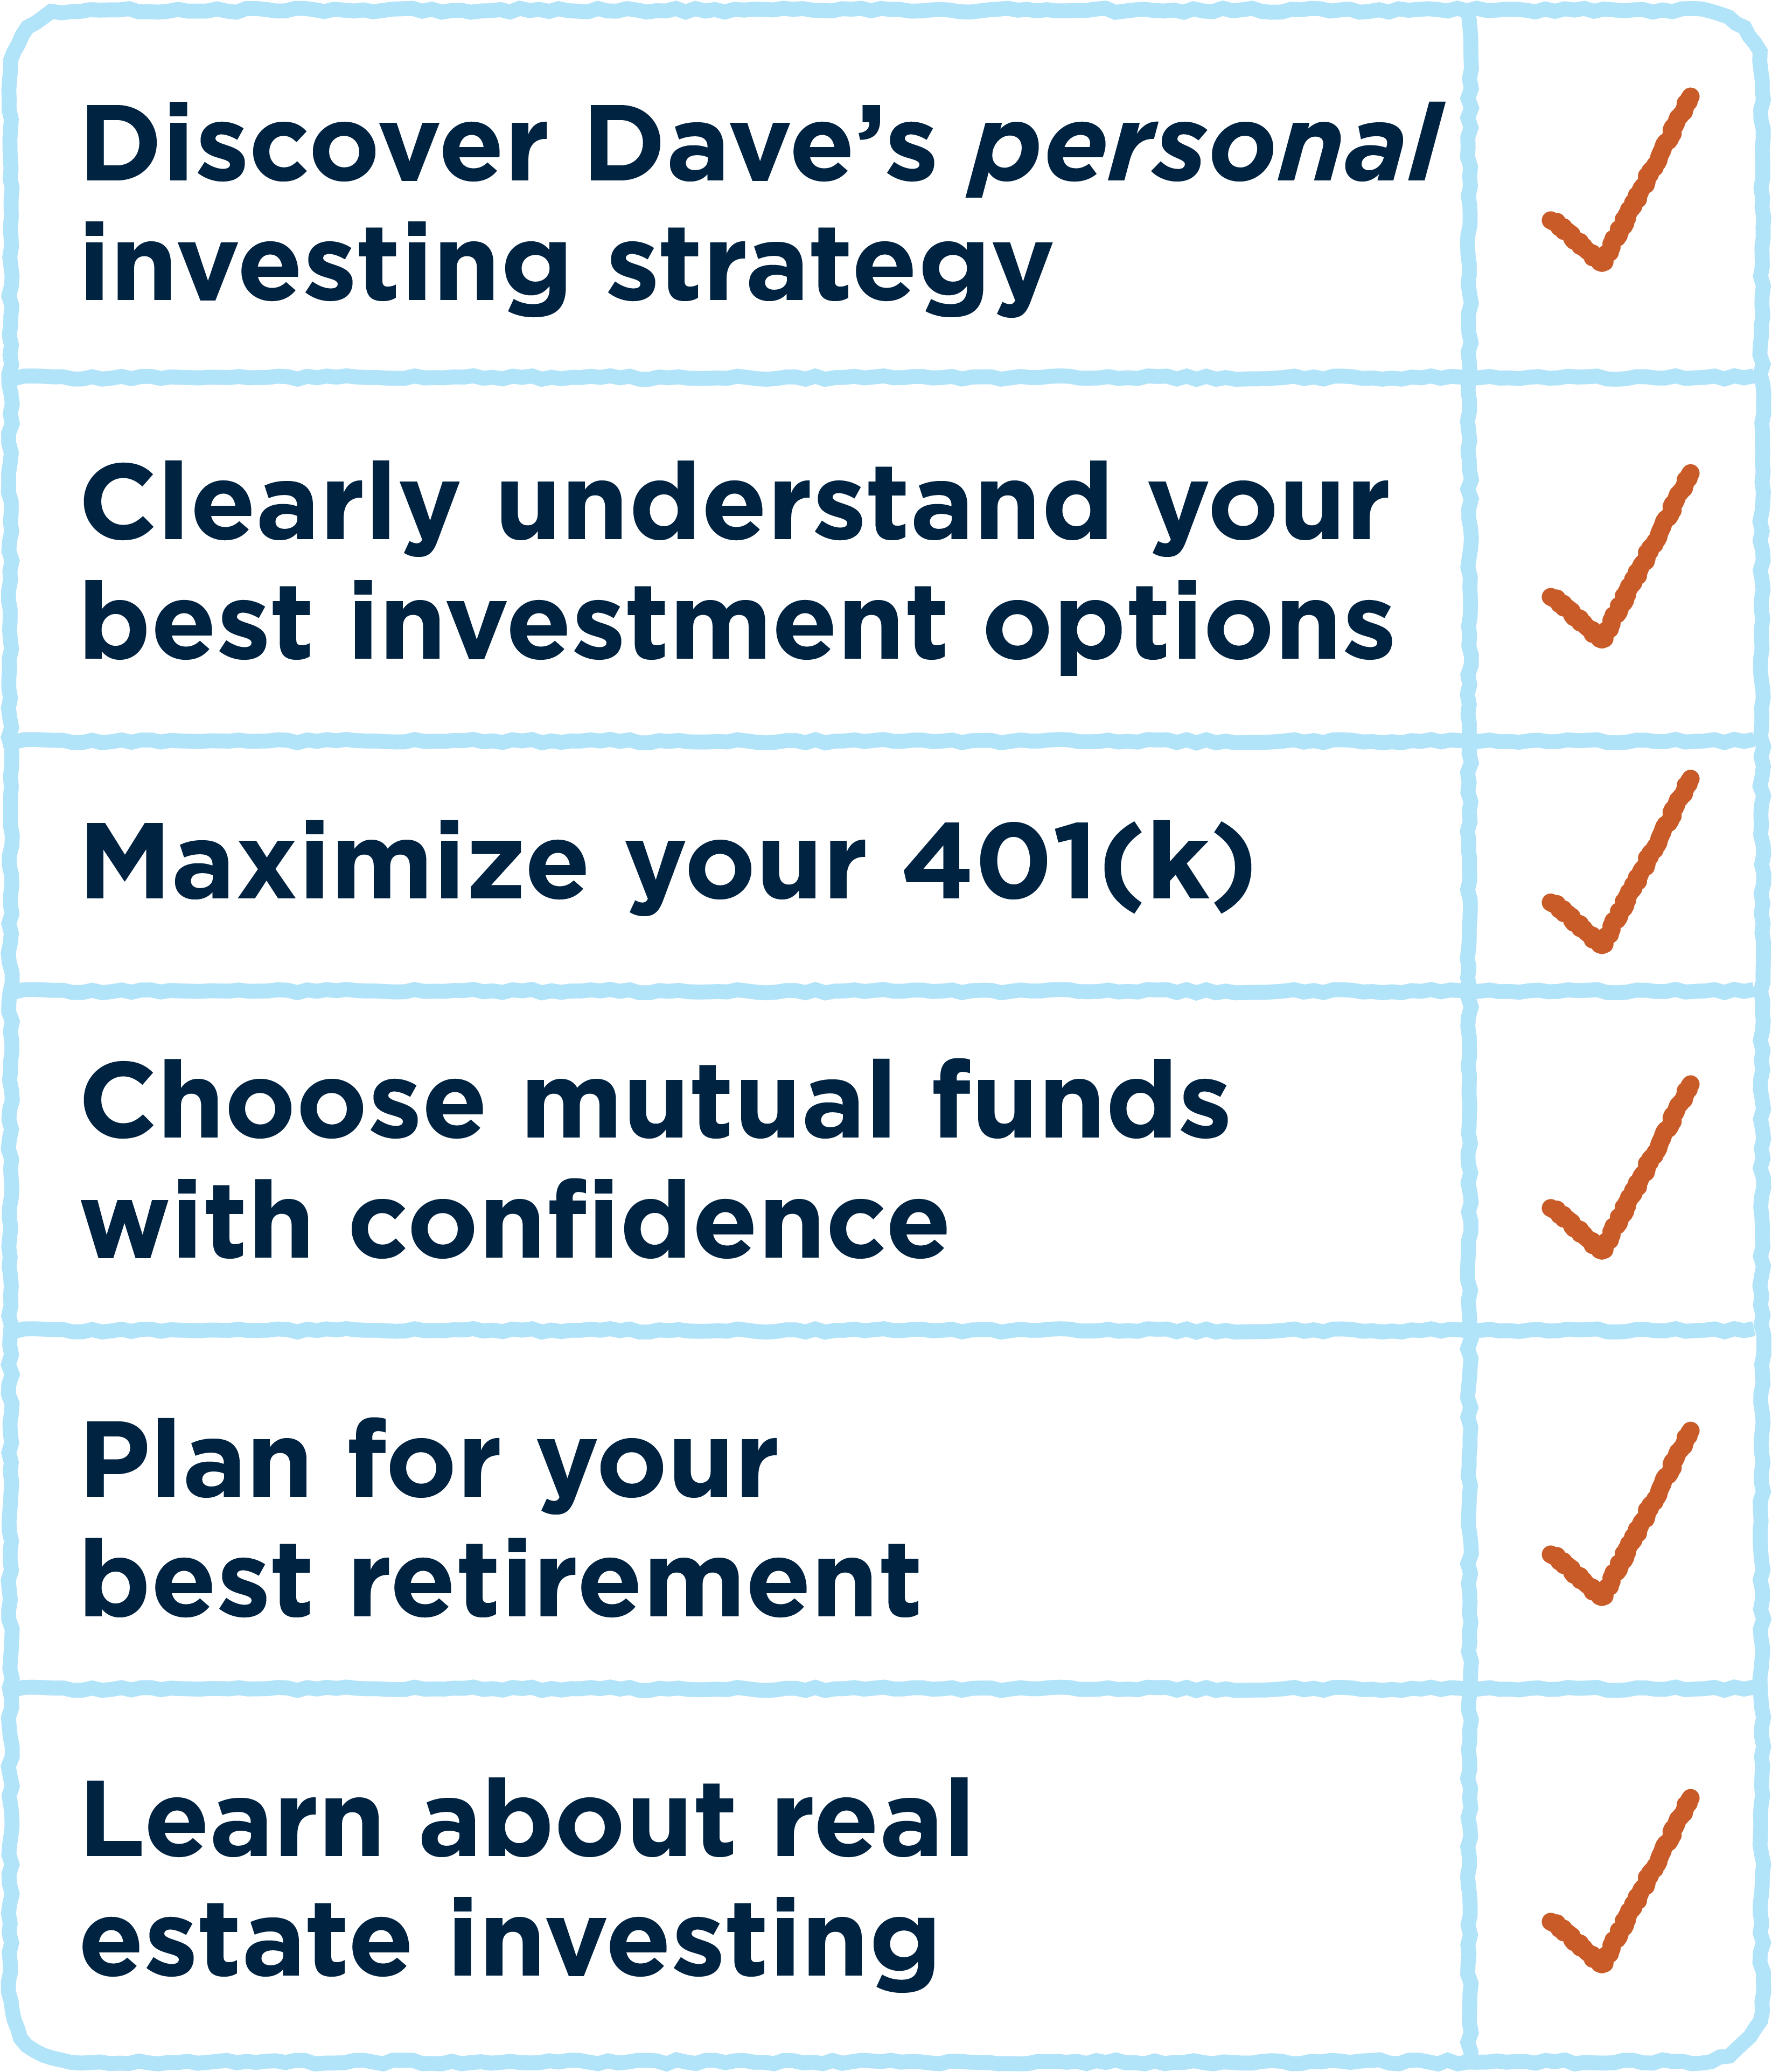 Discover Dave's personal investing strategy, clearly understand your best investment options, maximize your 401k, choose mutual funds with confidence, plan for your best retirement, learn about real estate investing